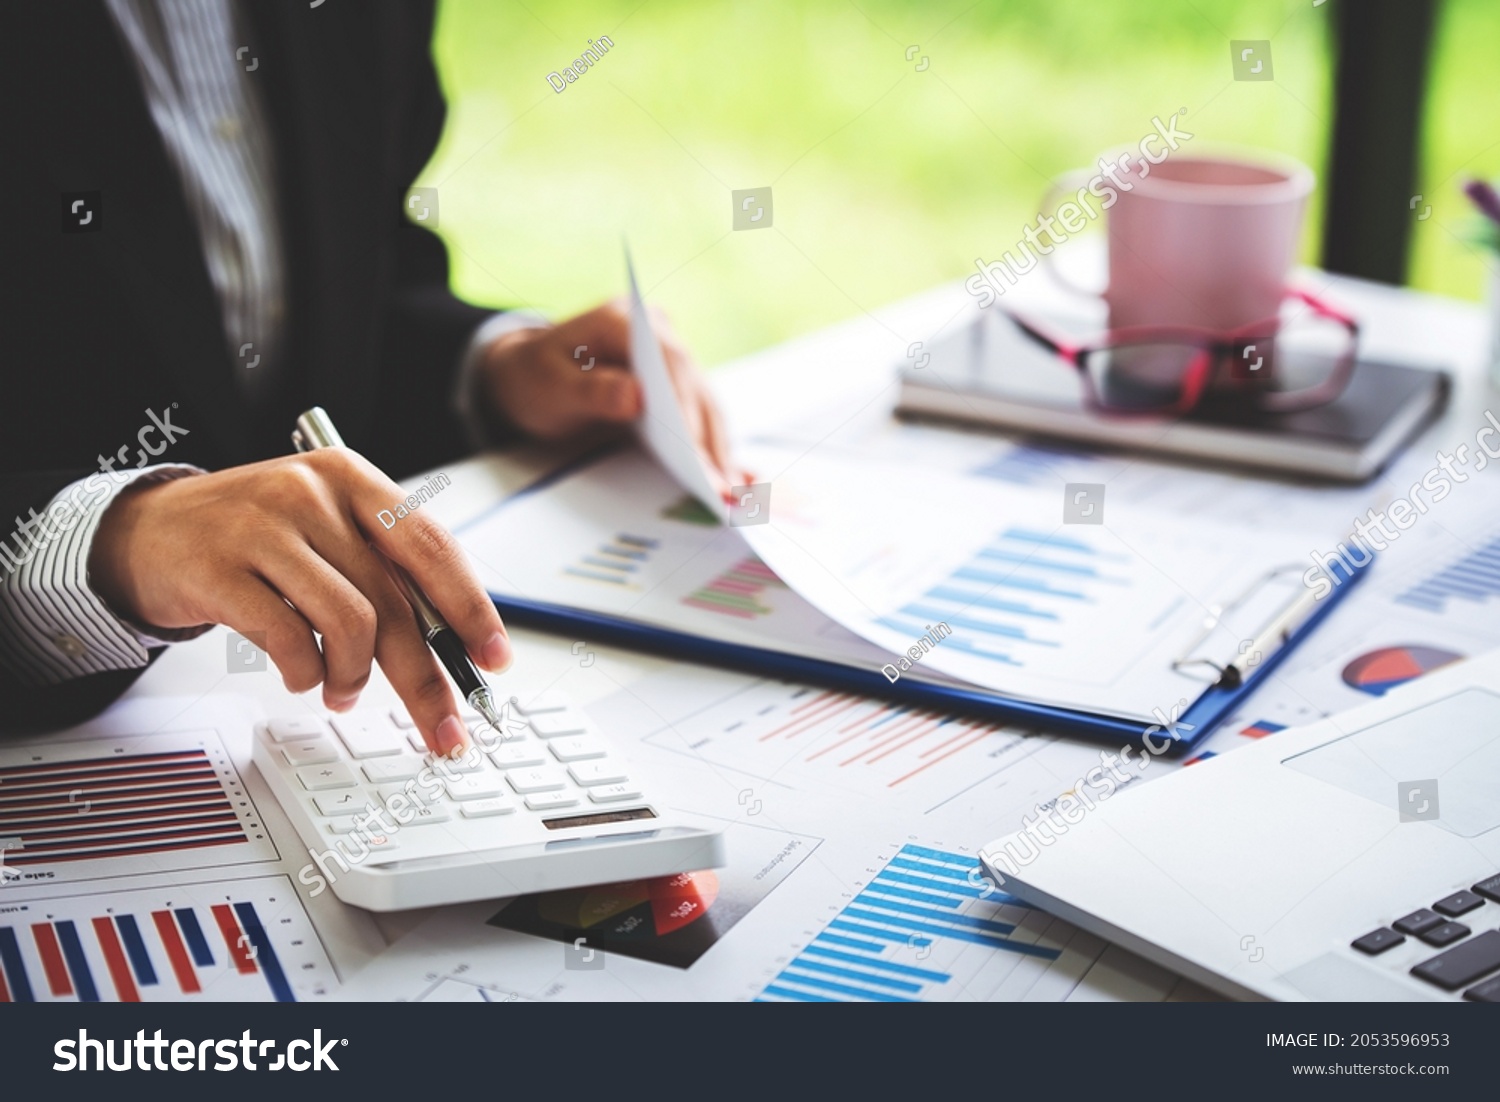 Close-up shot of woman pressing a calculator to review and summarize the cost of mortgage home loans for refinancing plans, lifestyle concept. #2053596953